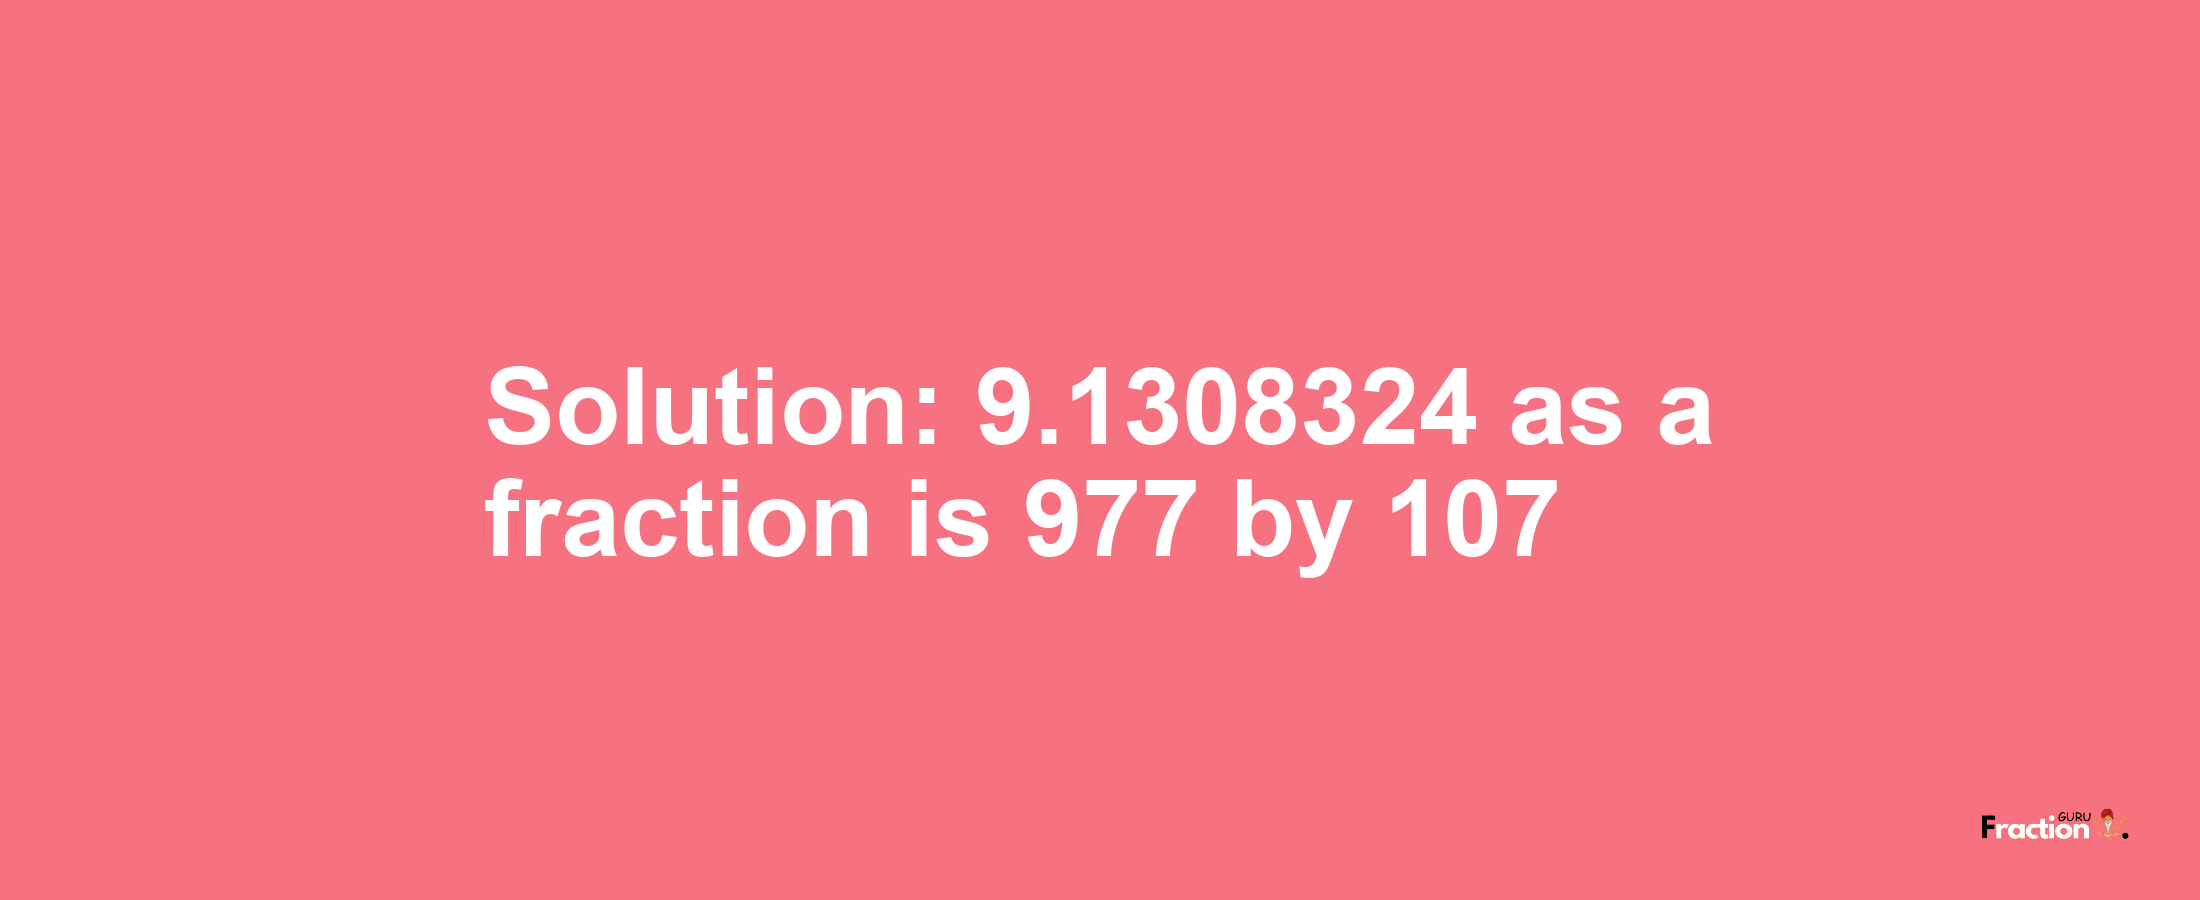 Solution:9.1308324 as a fraction is 977/107